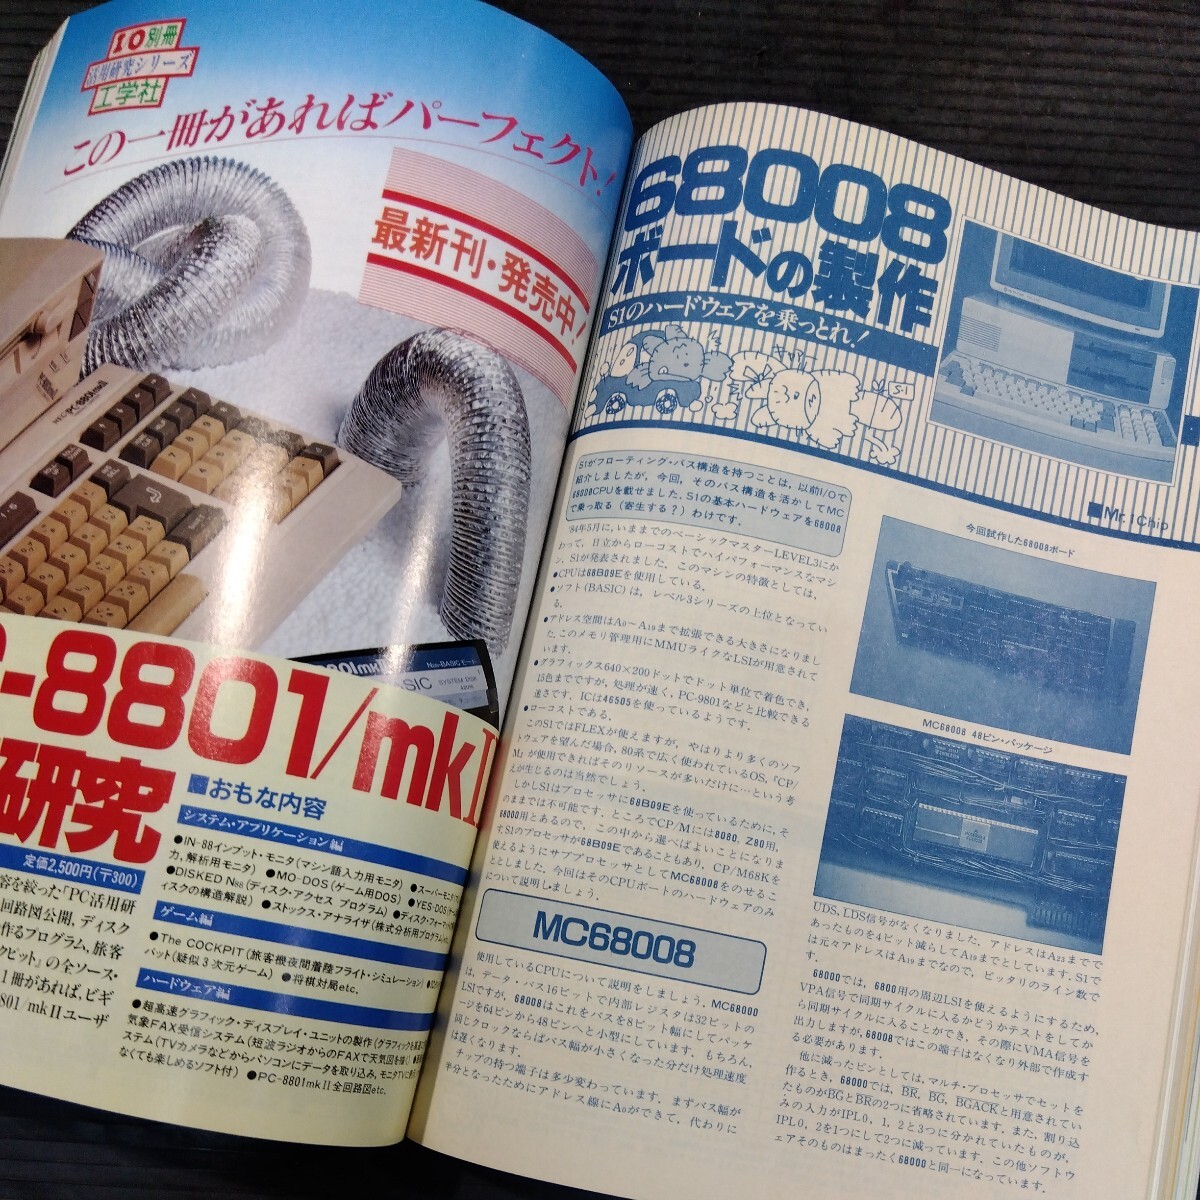 ⑦PC information magazine monthly I/O I o-1985 year 10 month number missing 11 pcs. present condition goods engineering company old book secondhand book old magazine personal computer computer Inter plita pocket computer 